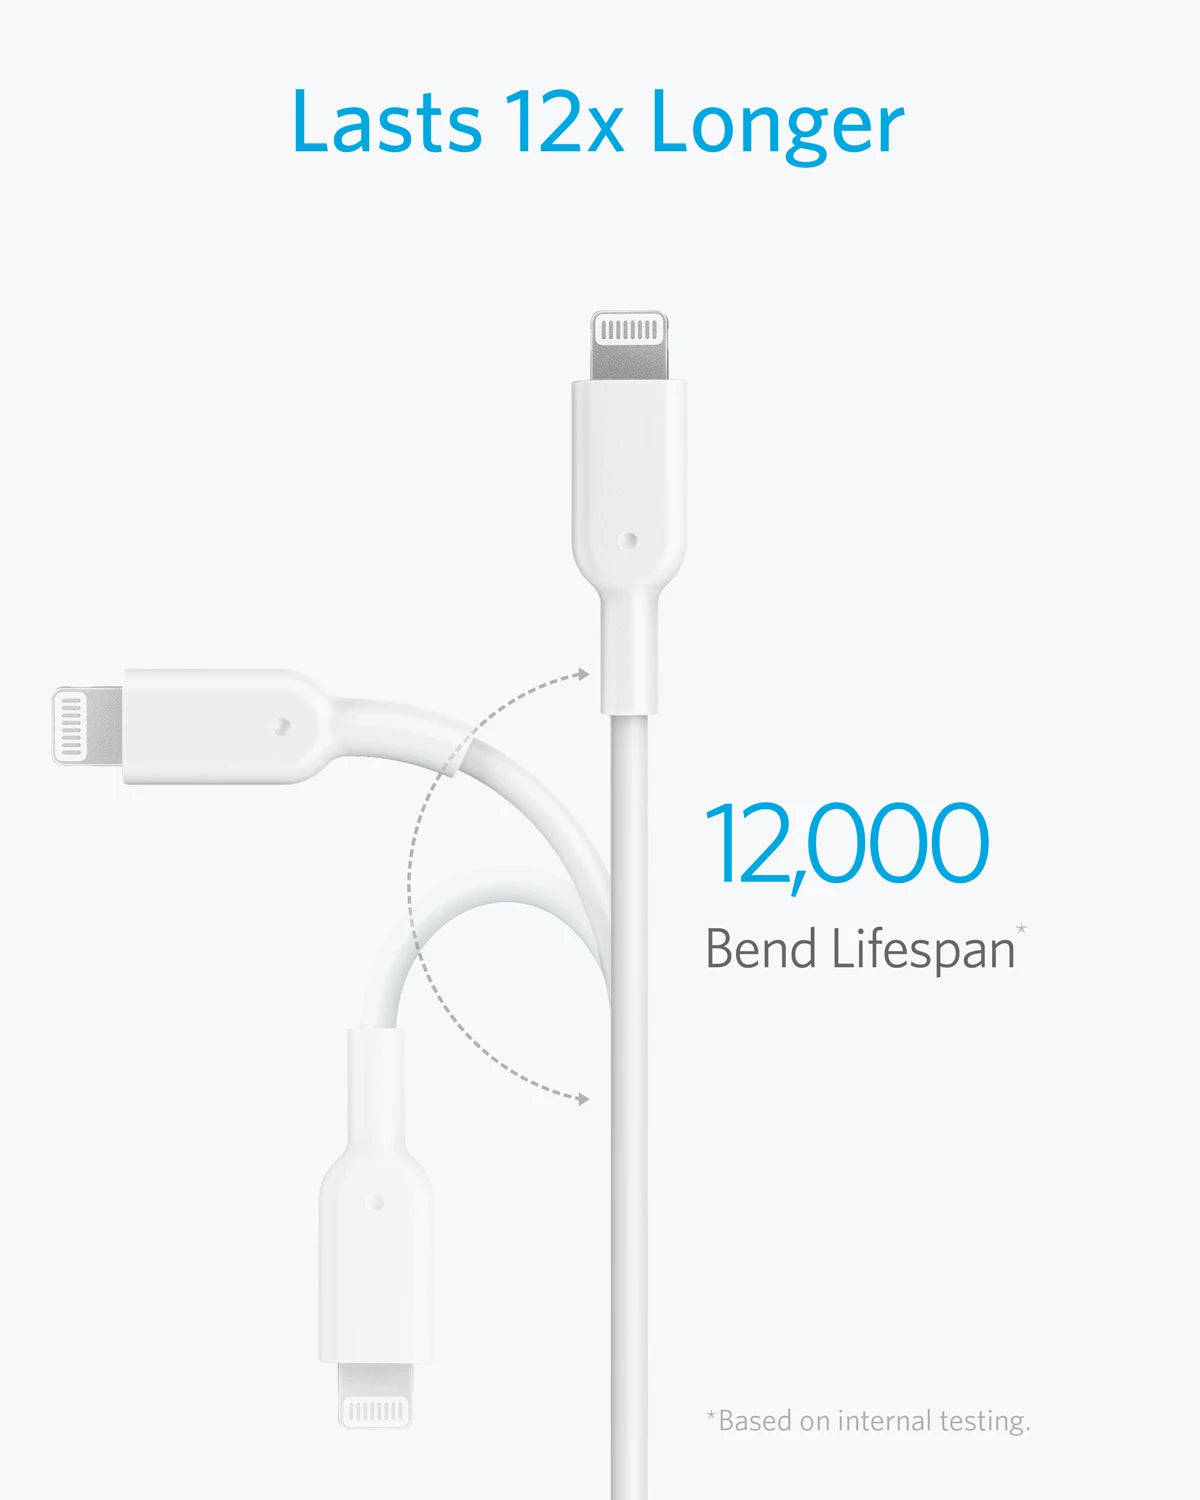 USB C charging cable